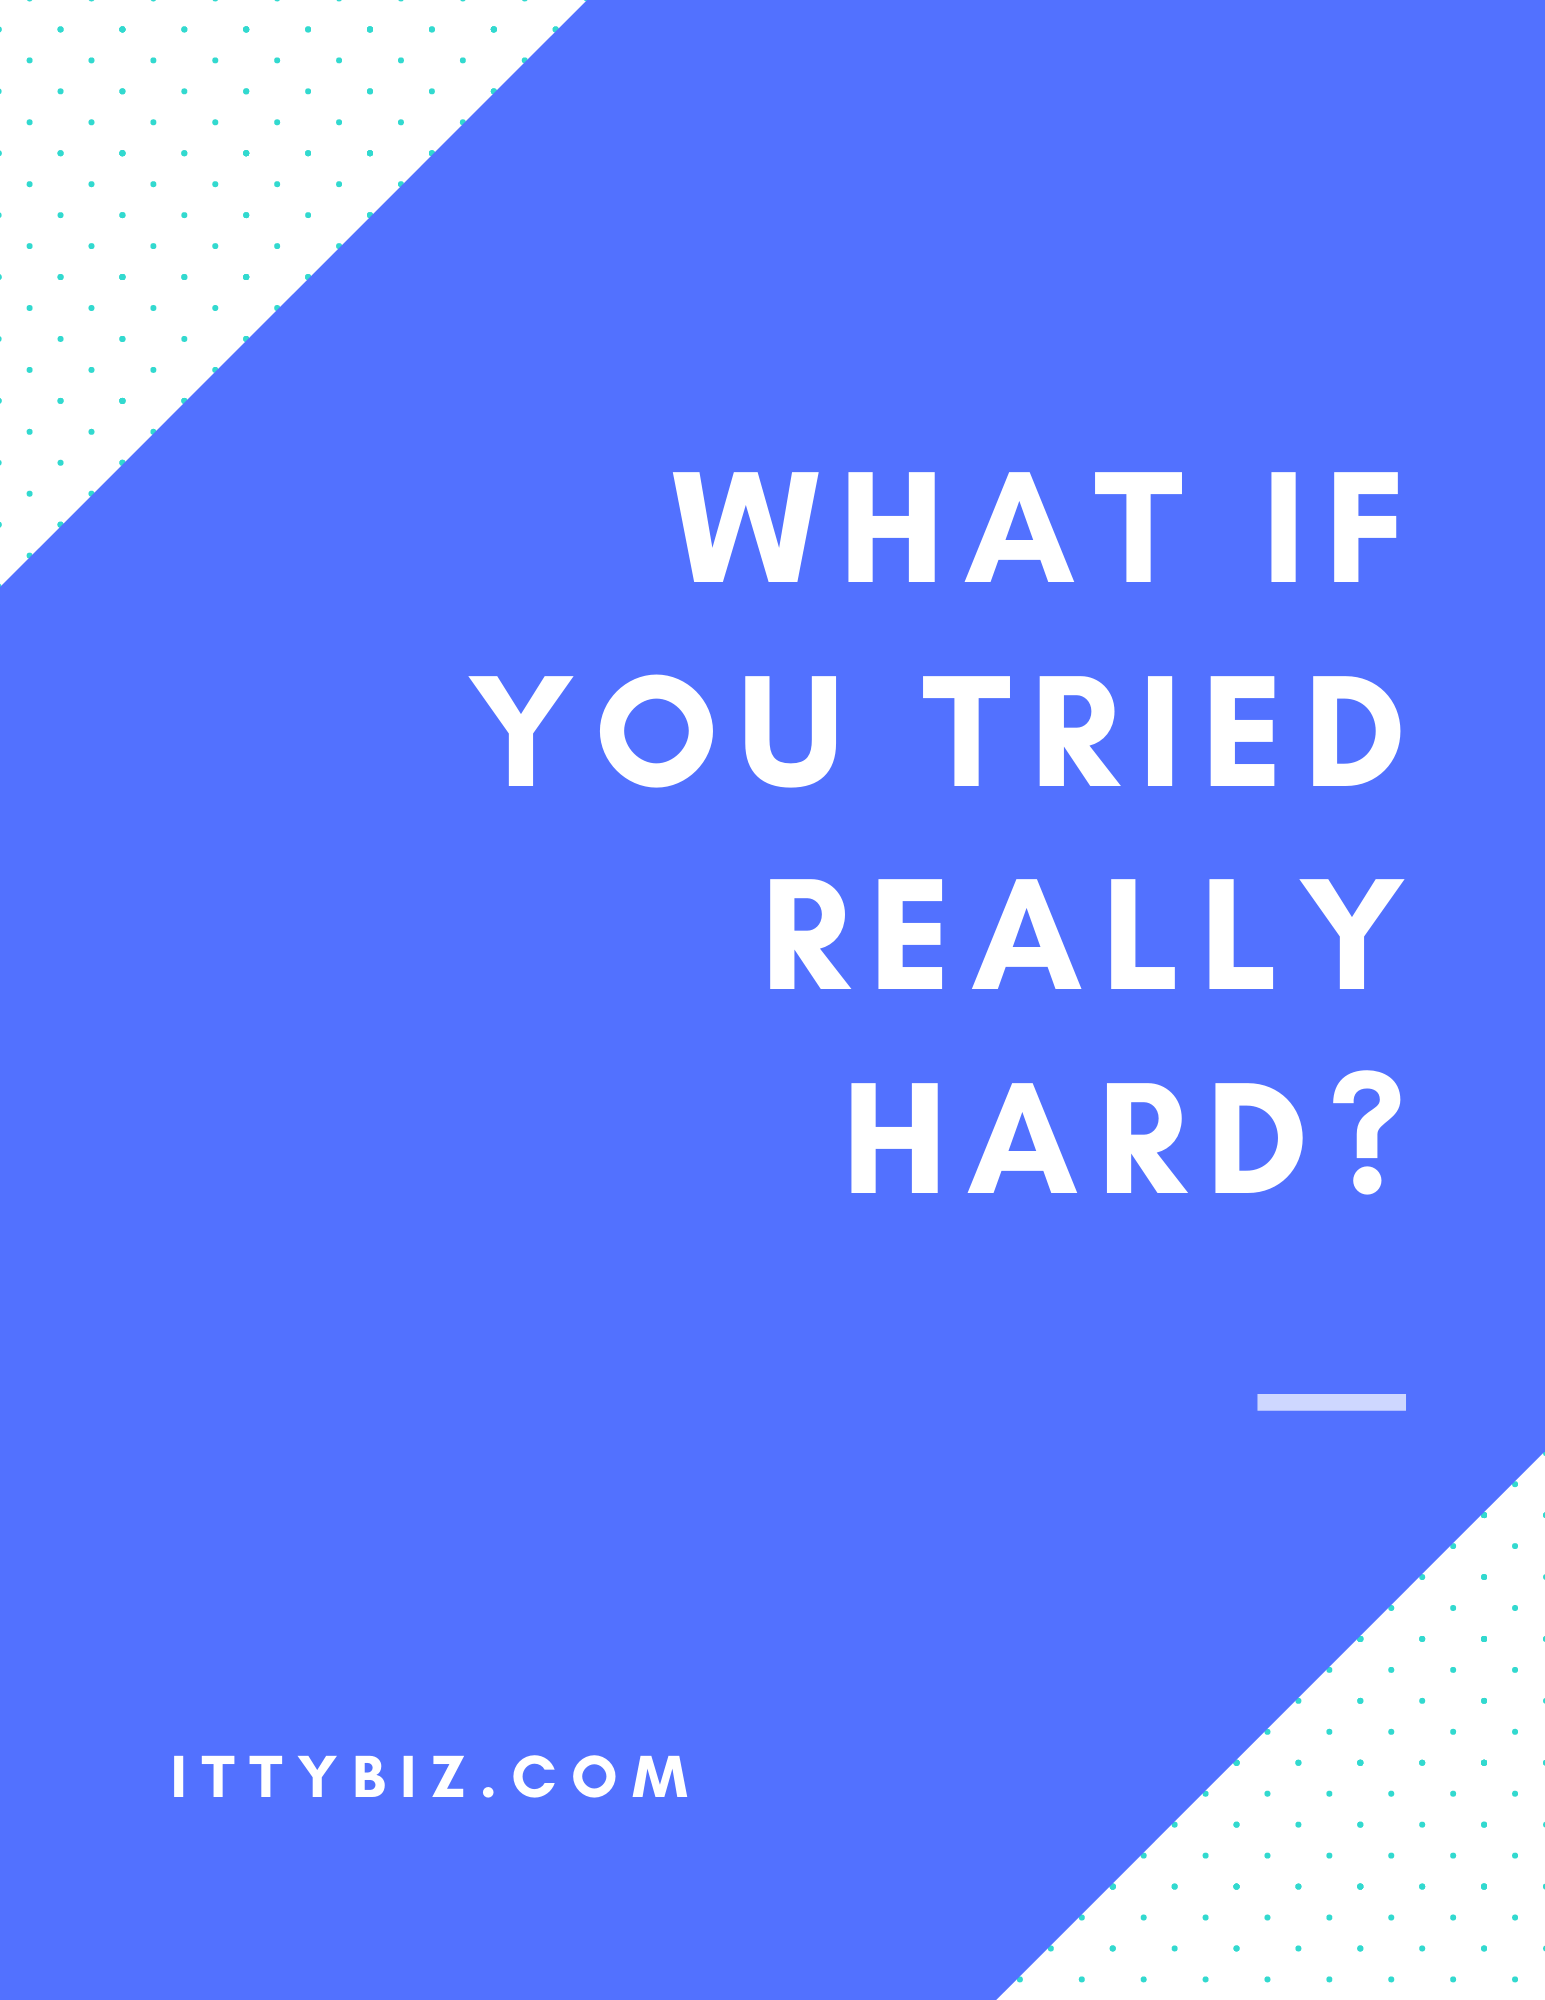 What If You Tried Really Hard?